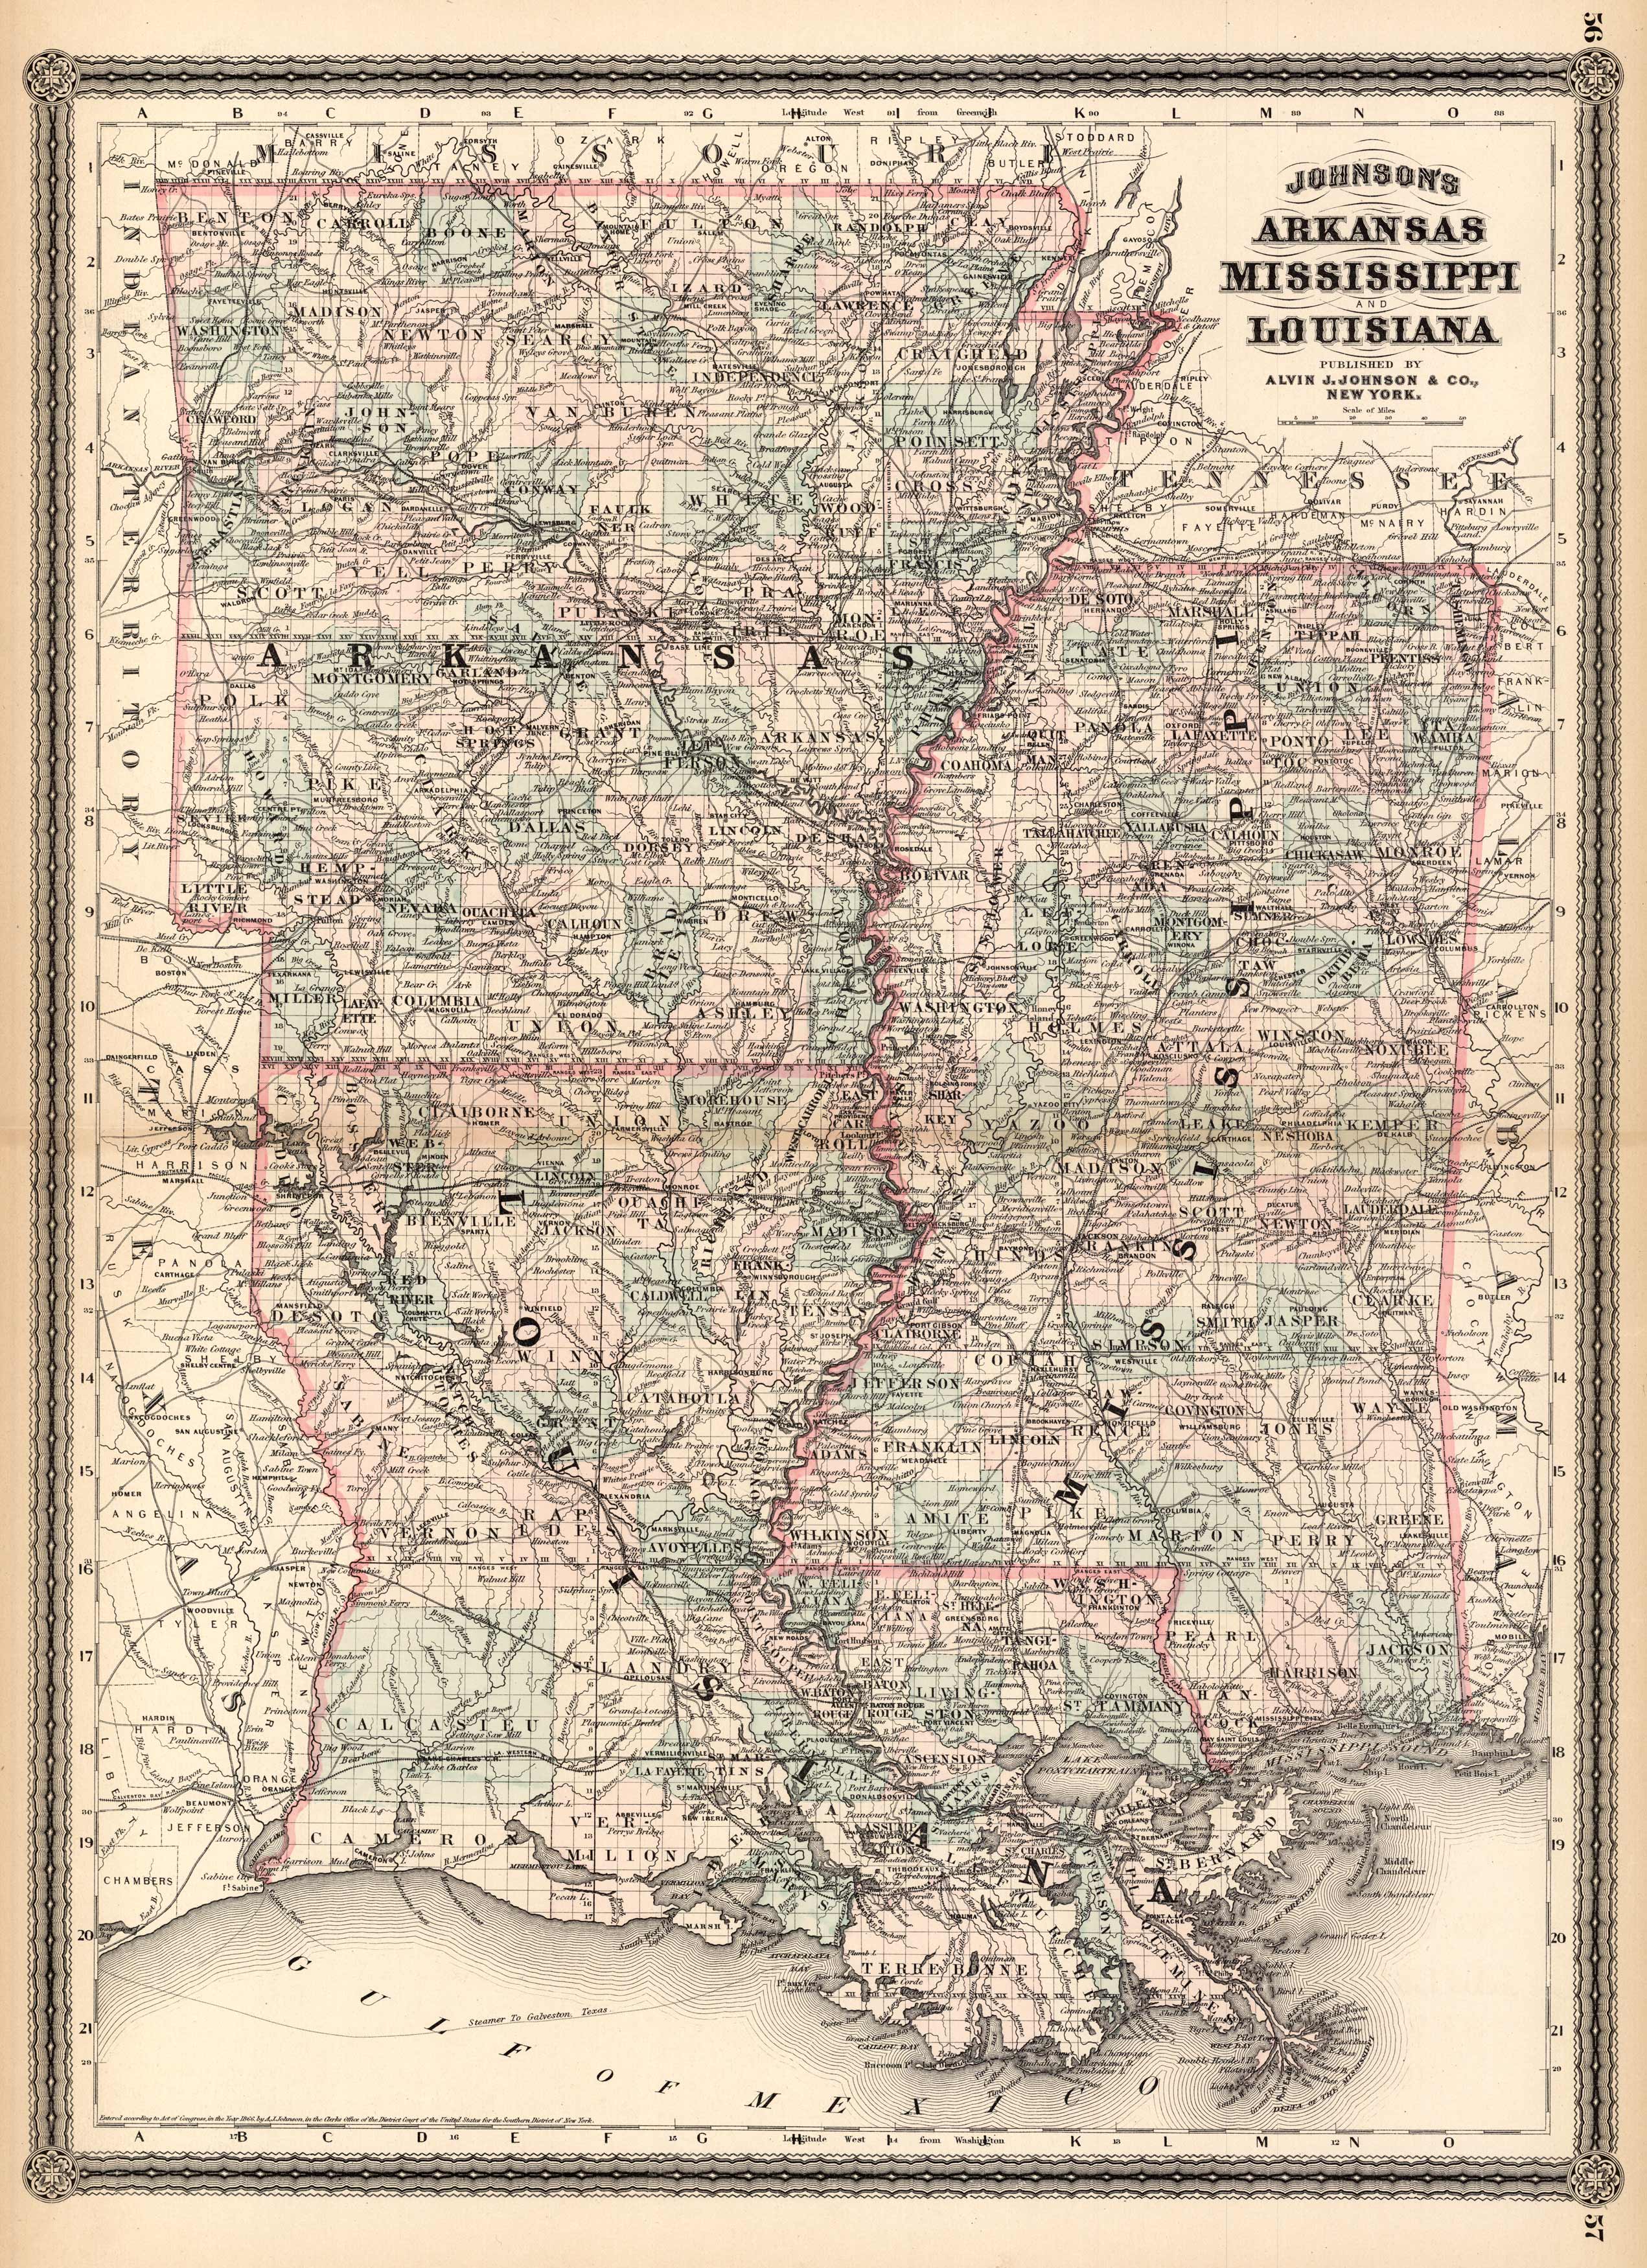 1872 - County Map of the States of Arkansas, Mississippi, and Louisian –  Maps of Antiquity